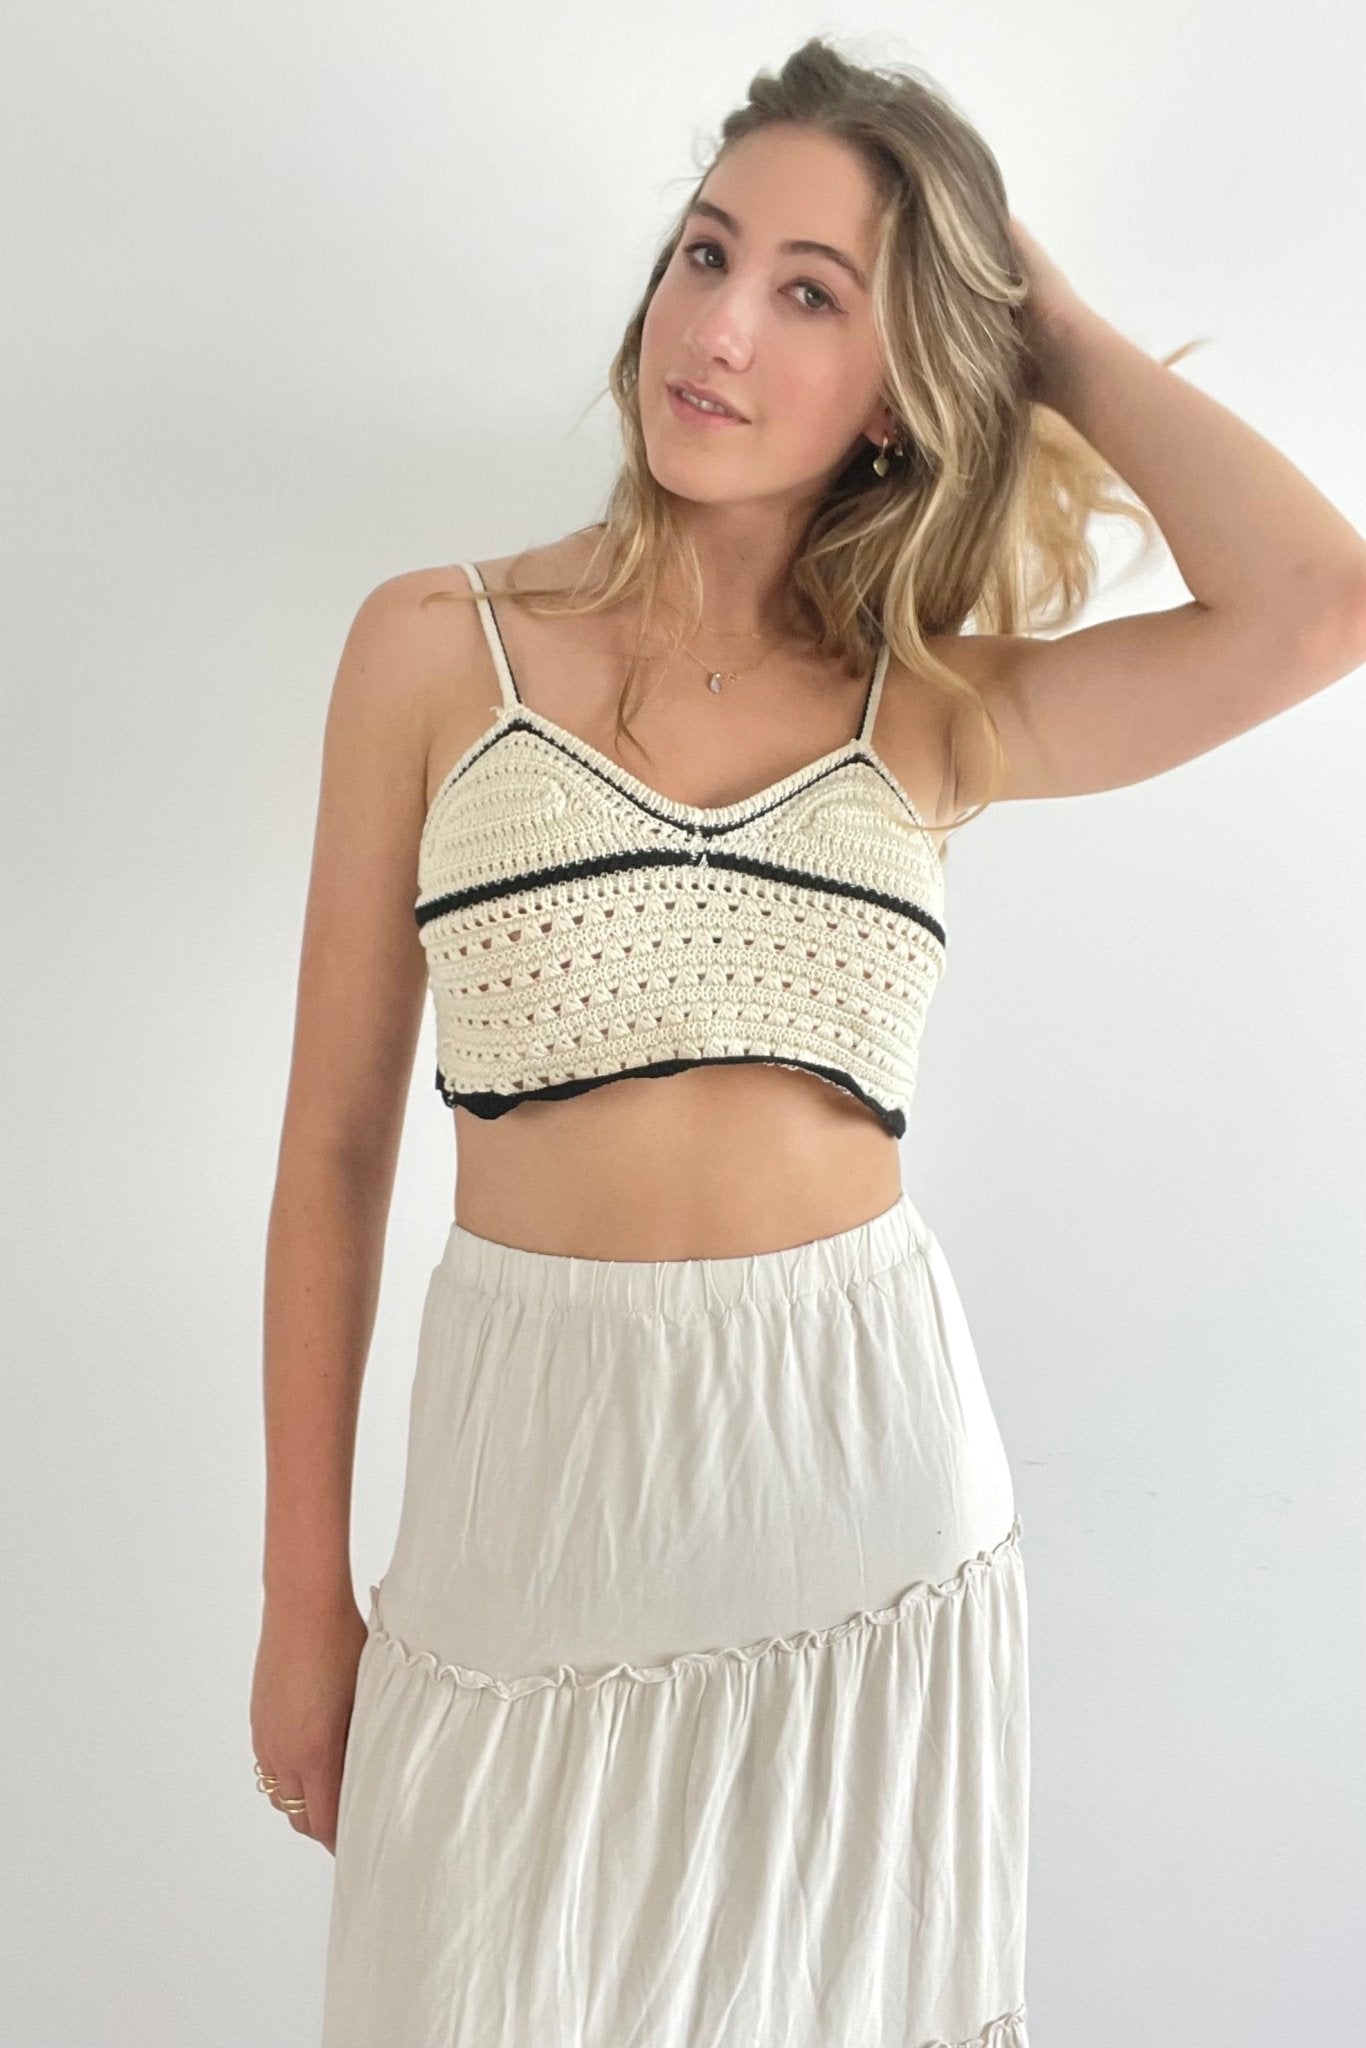 Florence night crochet cami - SCG_COLLECTIONSTop